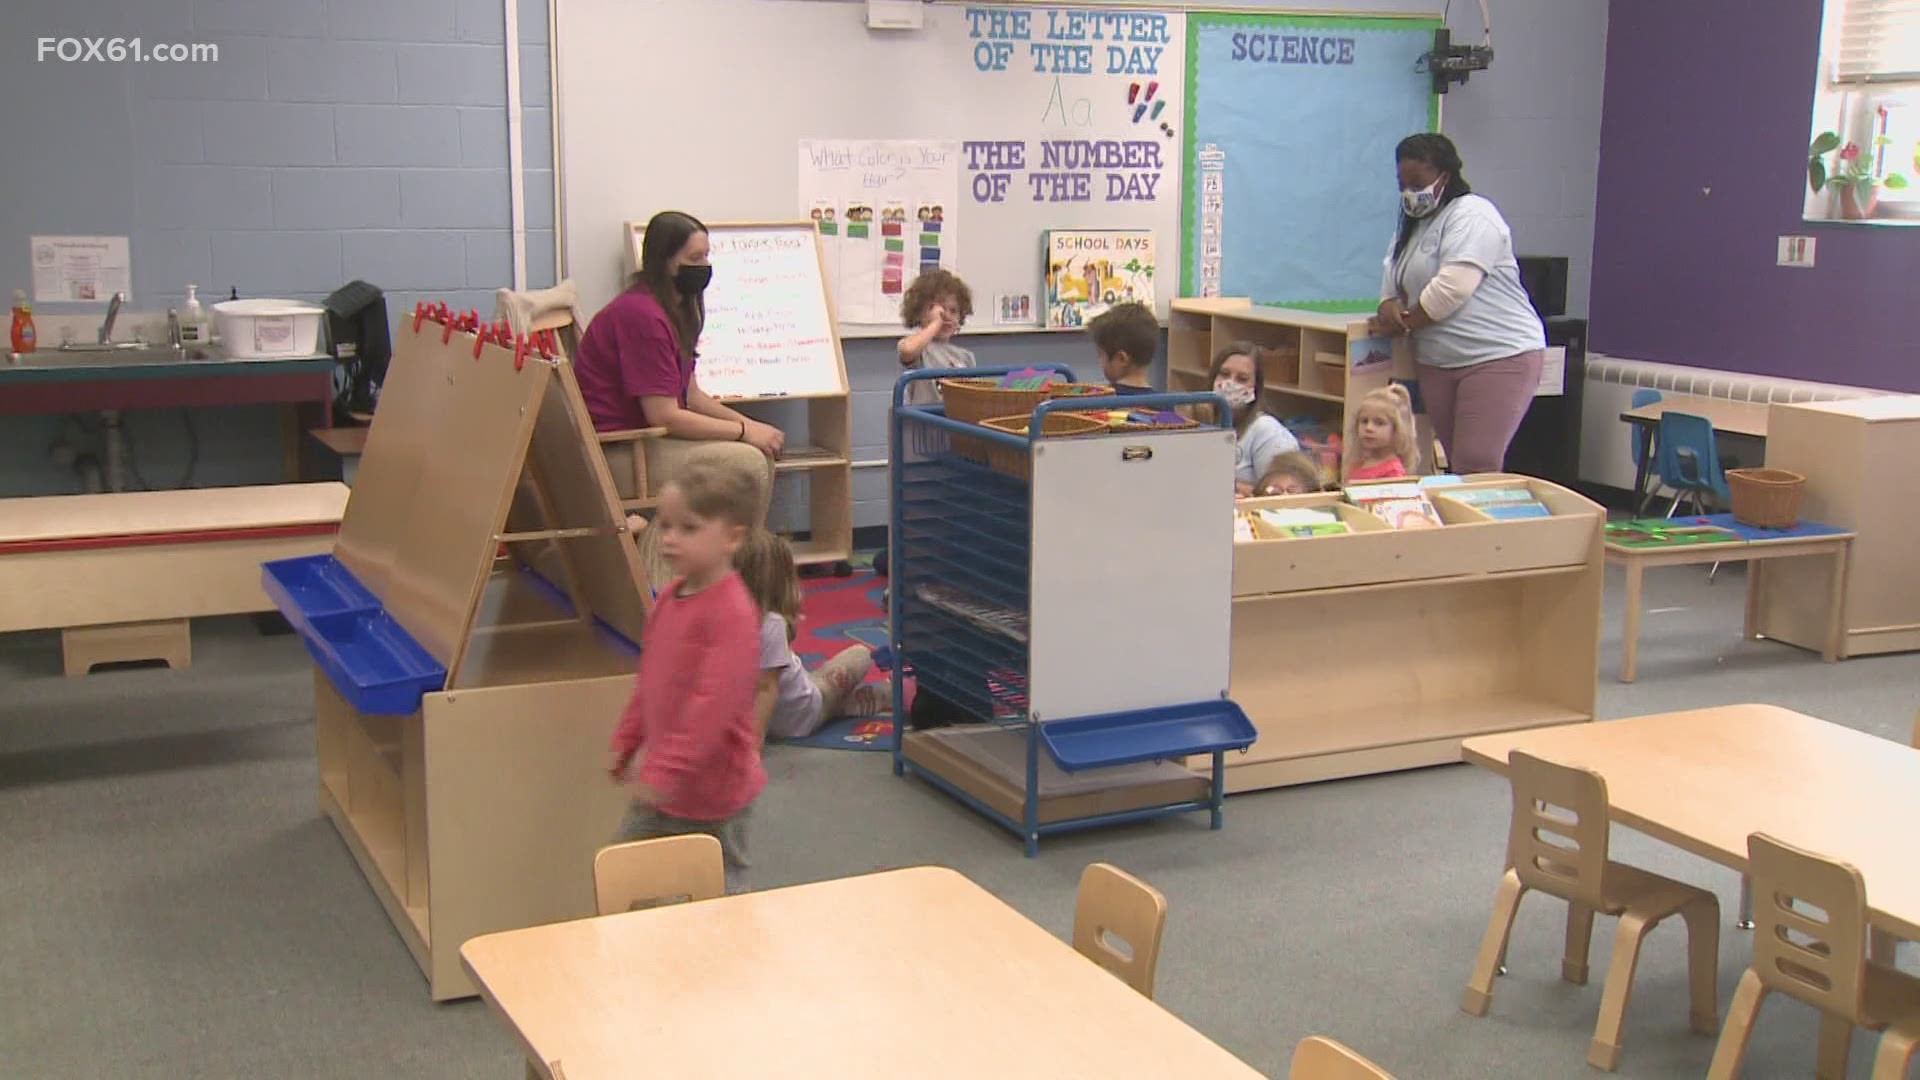 Teachers were potentially going to have to take the year off due to lack of childcare.